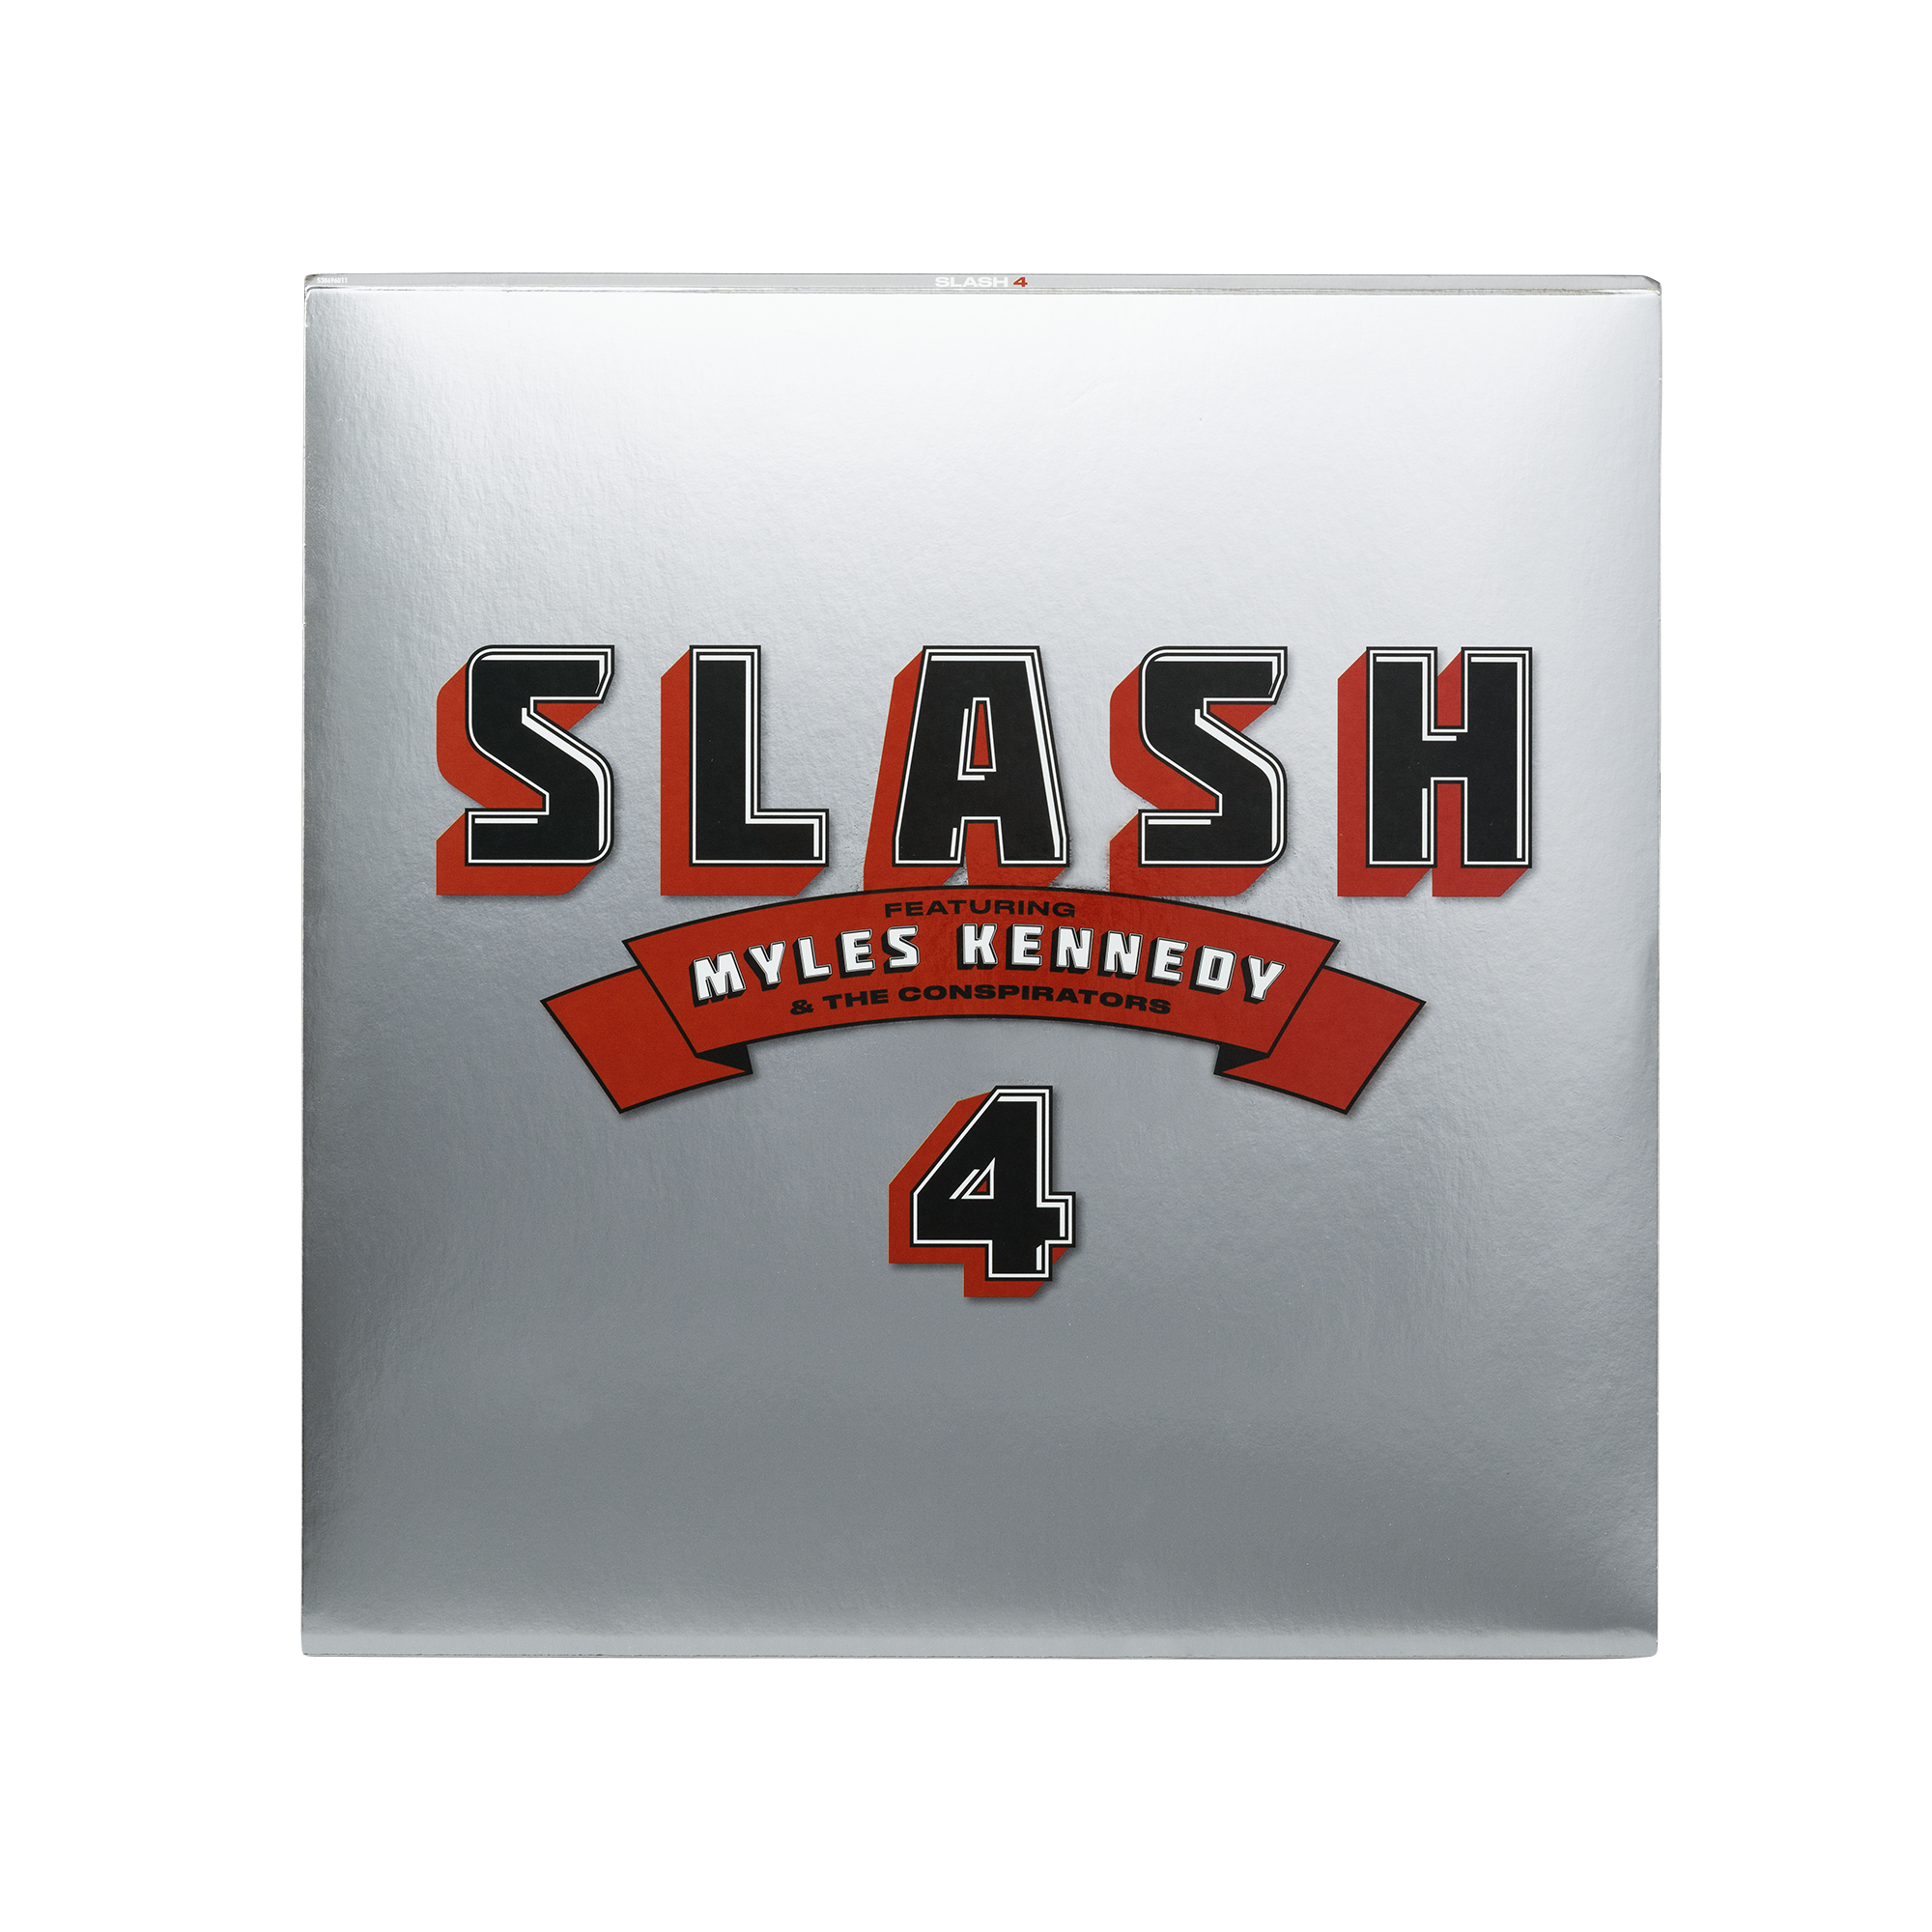 Slash featuring Myles Kennedy & The Conspirators - Living The Dream Tour [2  CD/BluRay] -  Music